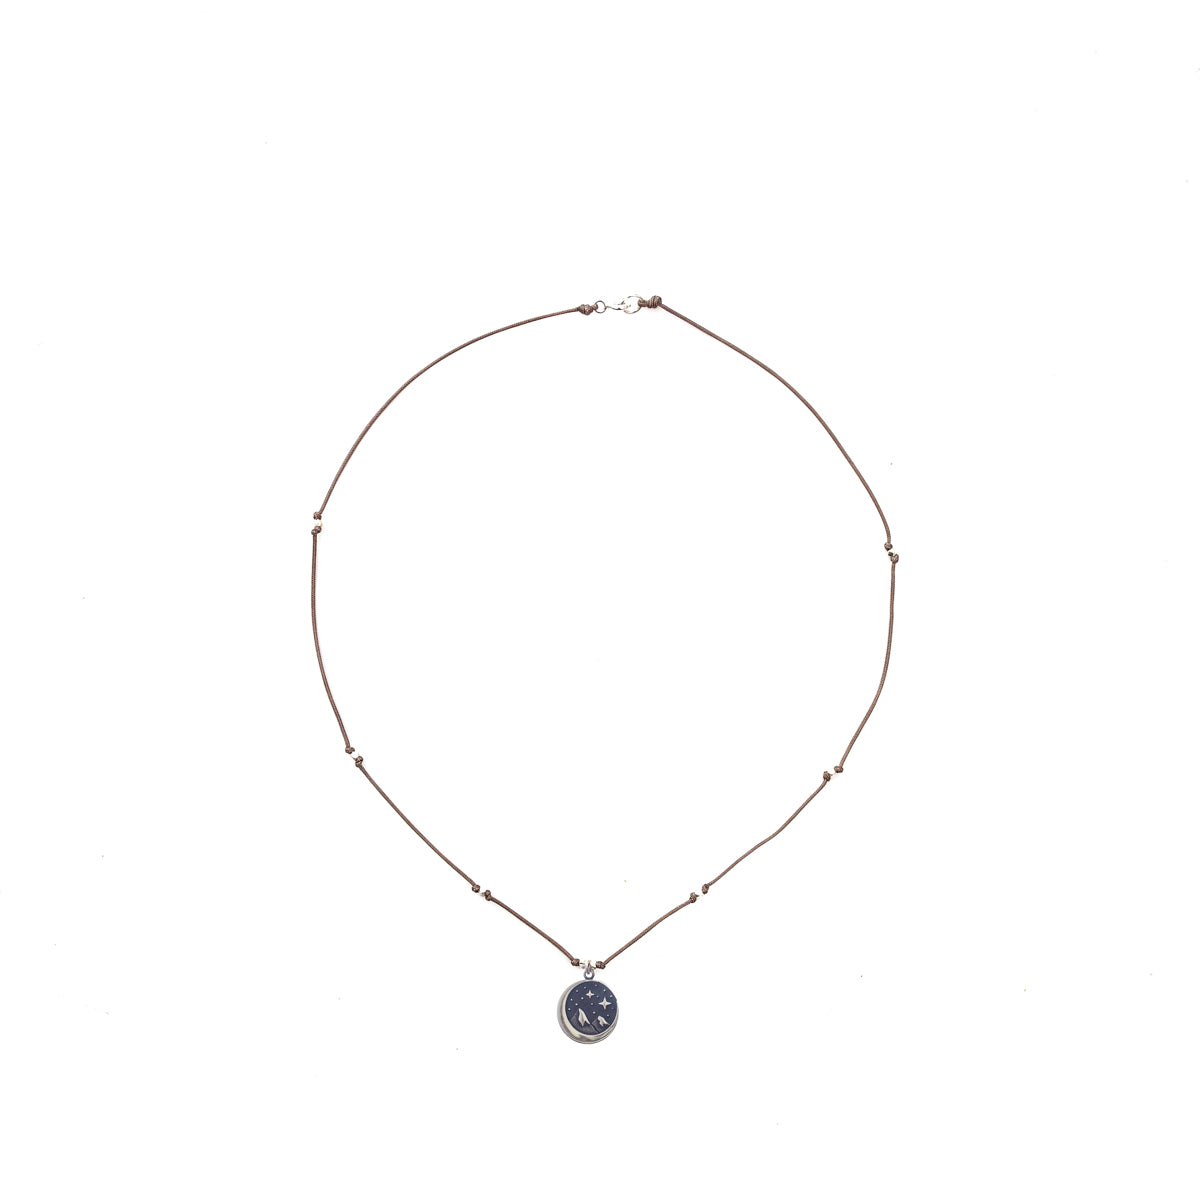 Our Stargazer necklace is water worthy, strong and a Bronwen Jewelry favorite. Perfect for your active lifestyle